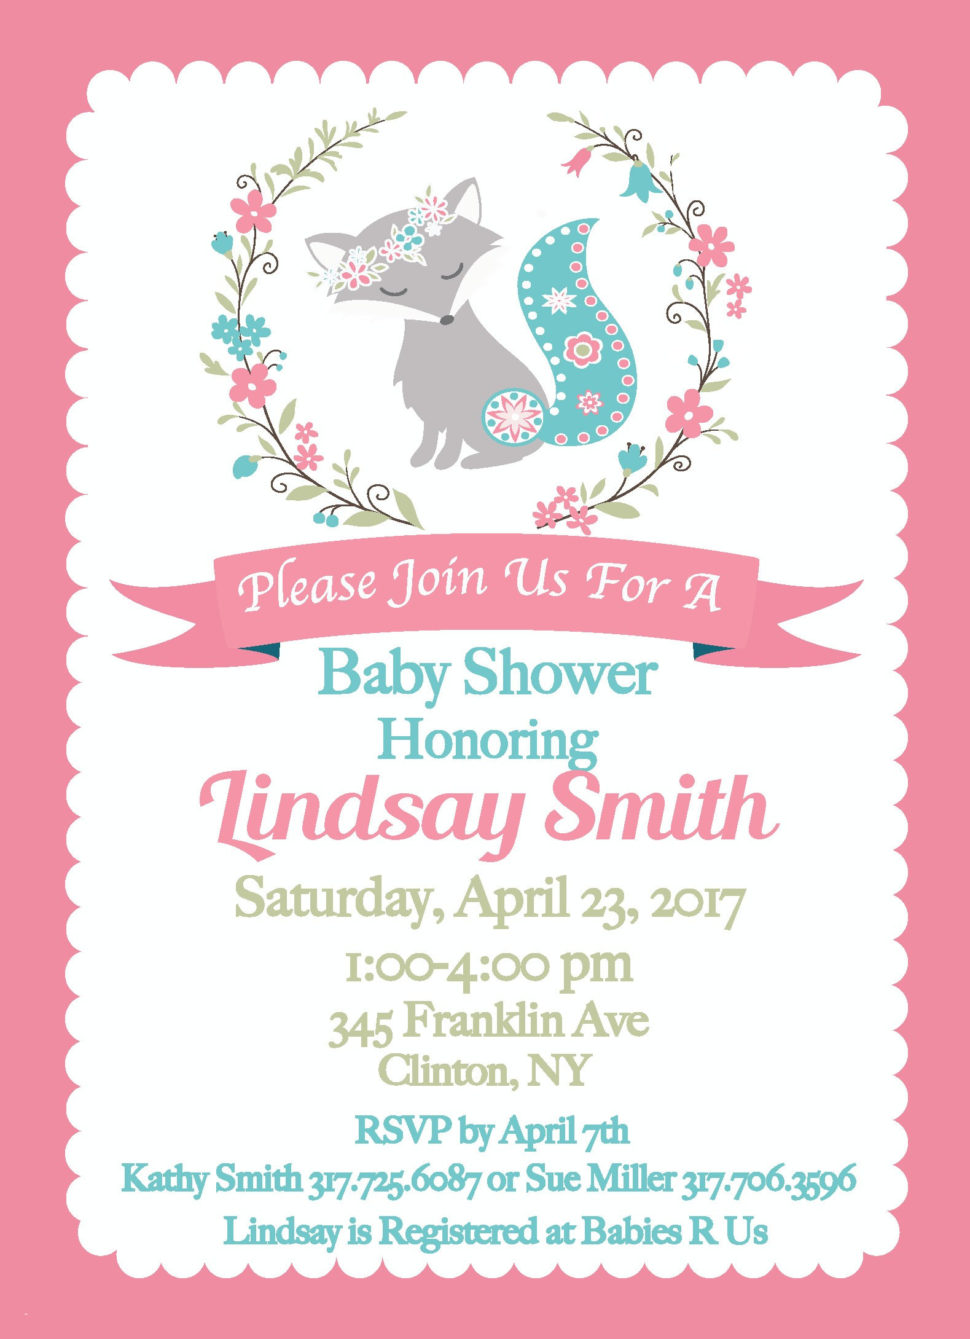 Medium Size of Baby Shower:63+ Delightful Cheap Baby Shower Invitations Image Inspirations Baby Shower Gifts For Girls Arreglos Para Baby Shower Baby Shower Gift Ideas Baby Shower Wording